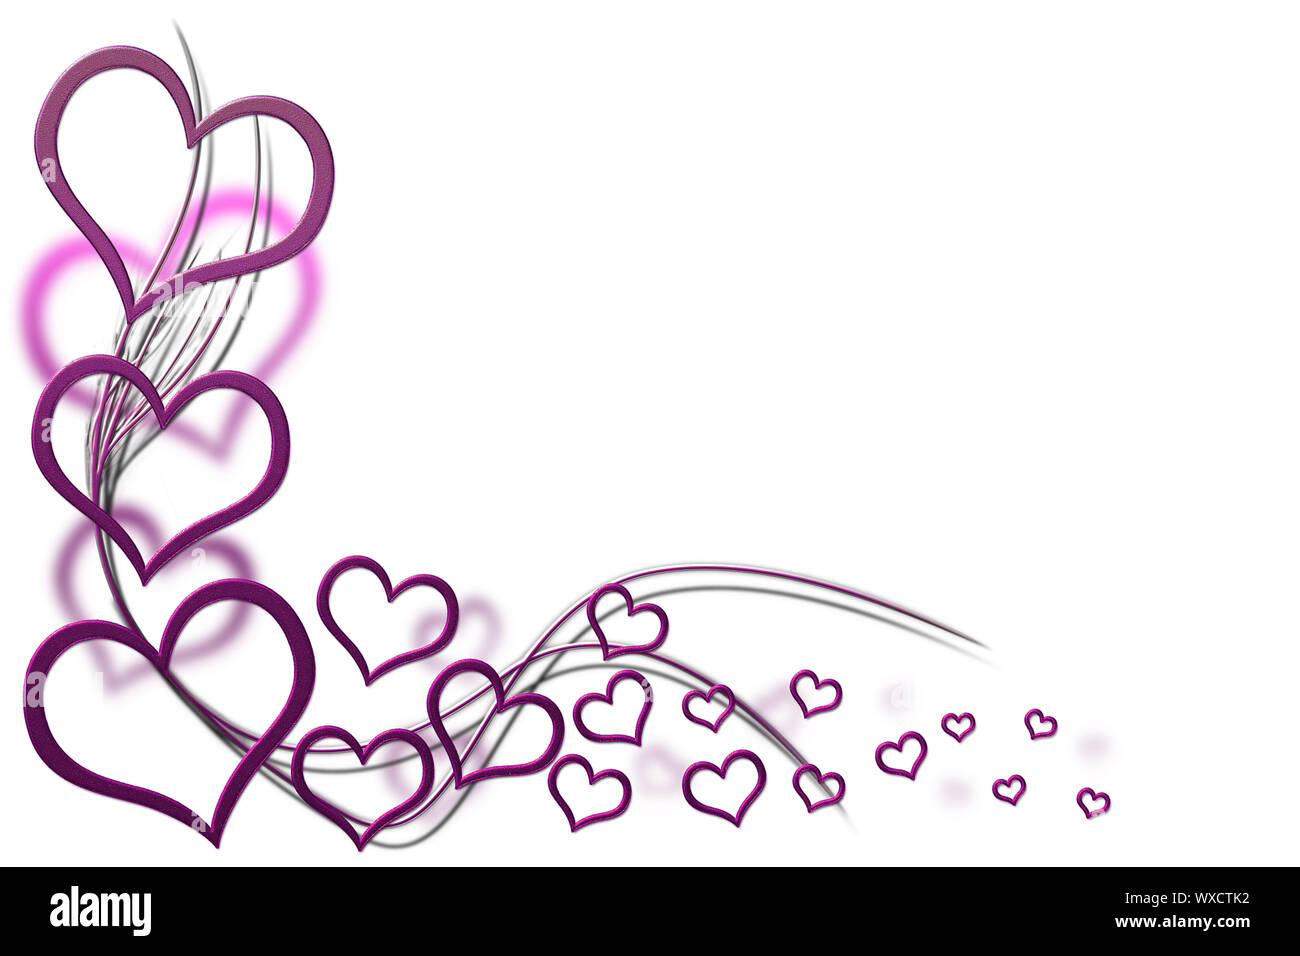 Valentines day background for your designs with purple hearts and swirls Stock Photo